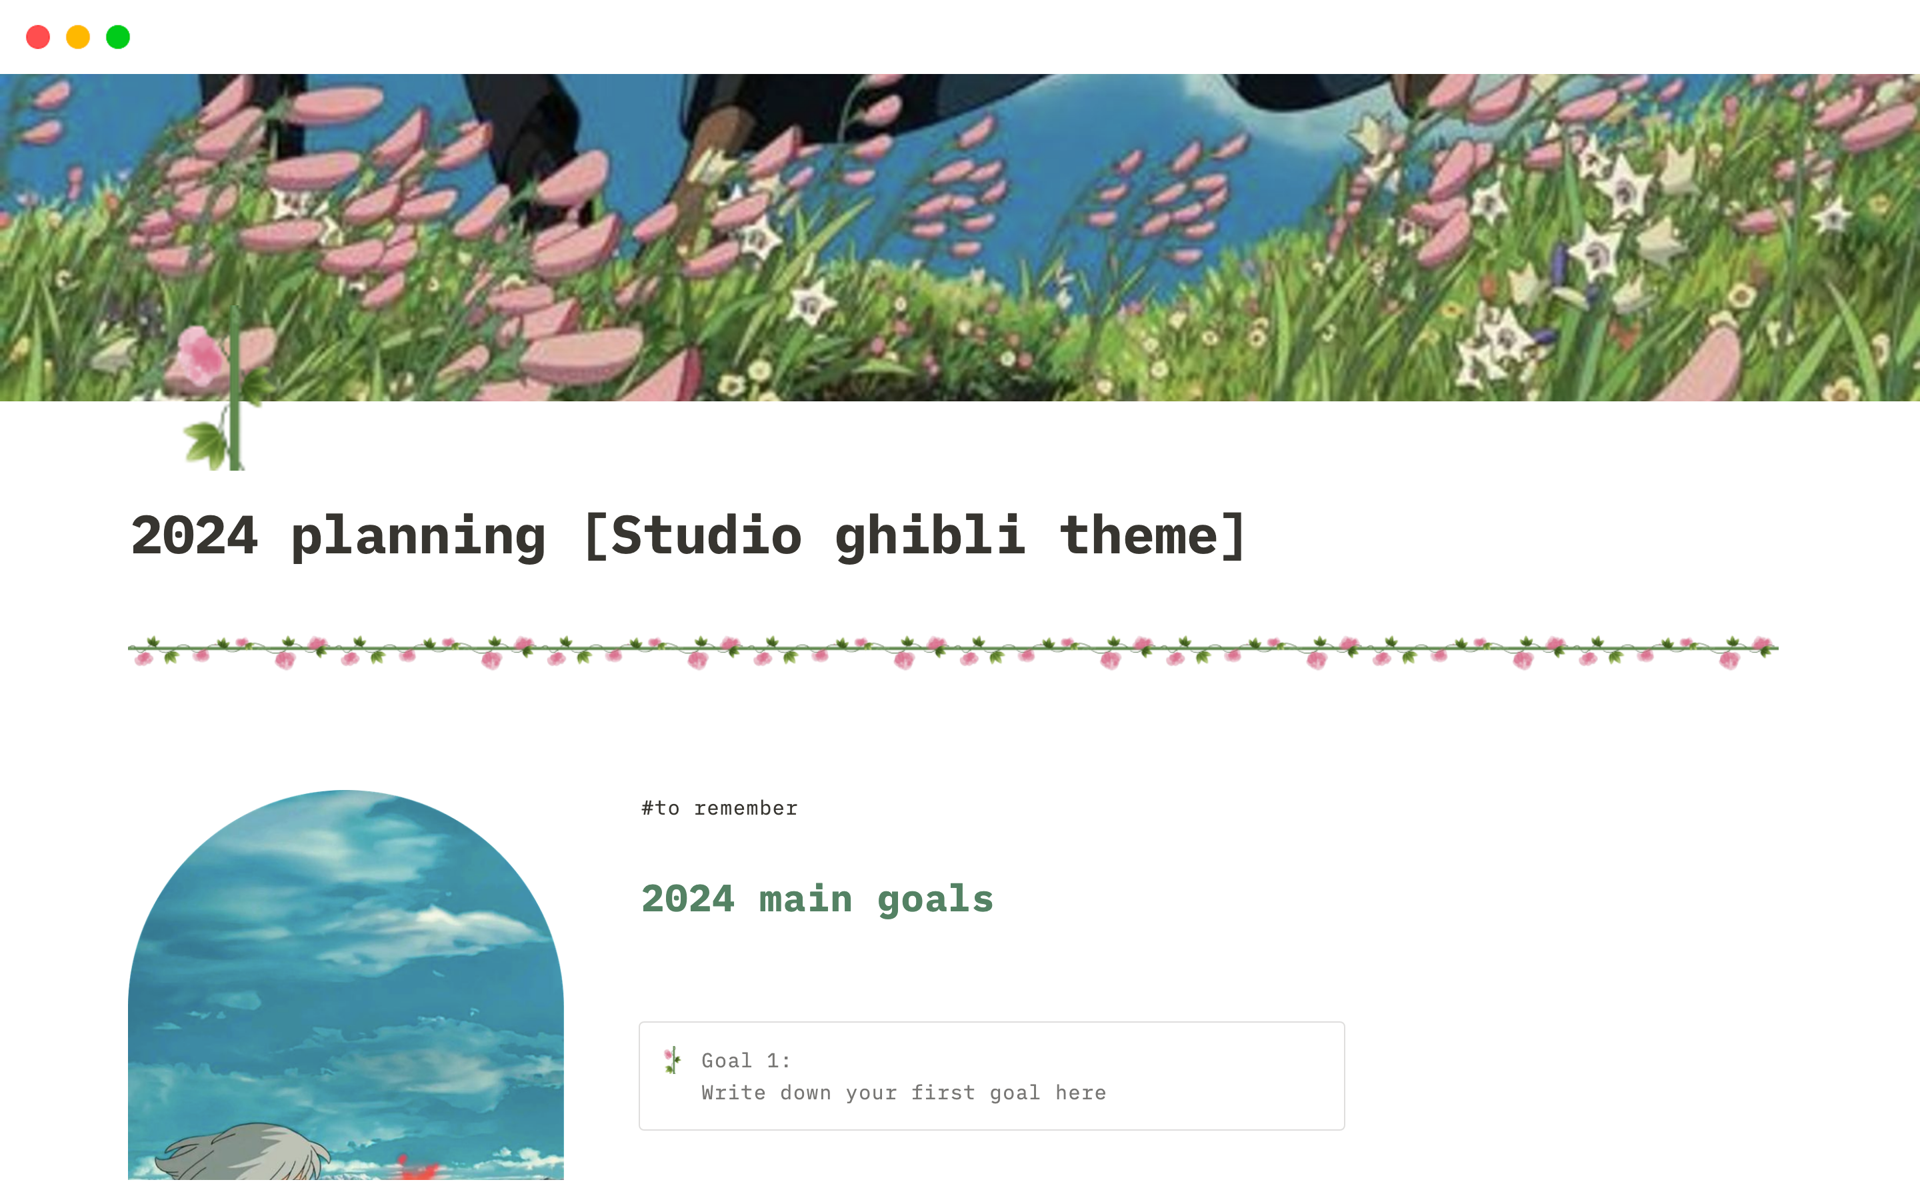 Planner for 2024 with goals with studio ghibli theme